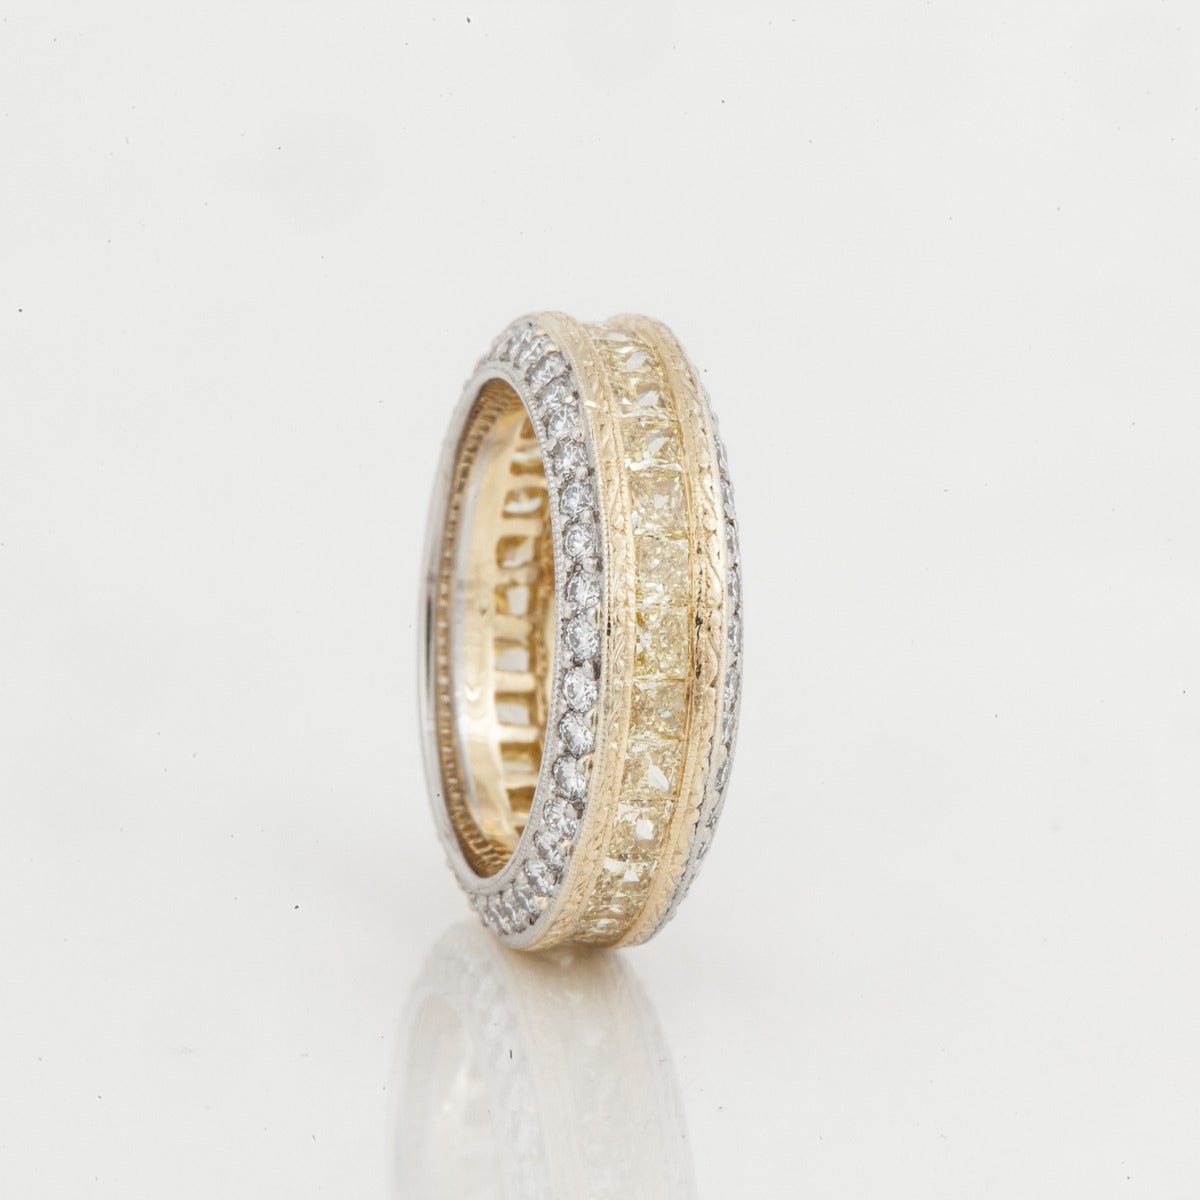 Michael Beaudry platinum and yellow gold diamond band.  Platinum borders set with round diamonds.  The center of the ring has radiant cut yellow diamonds with 18K  yellow gold bordering each side.  There are 29 fancy yellow radiant cut diamonds for